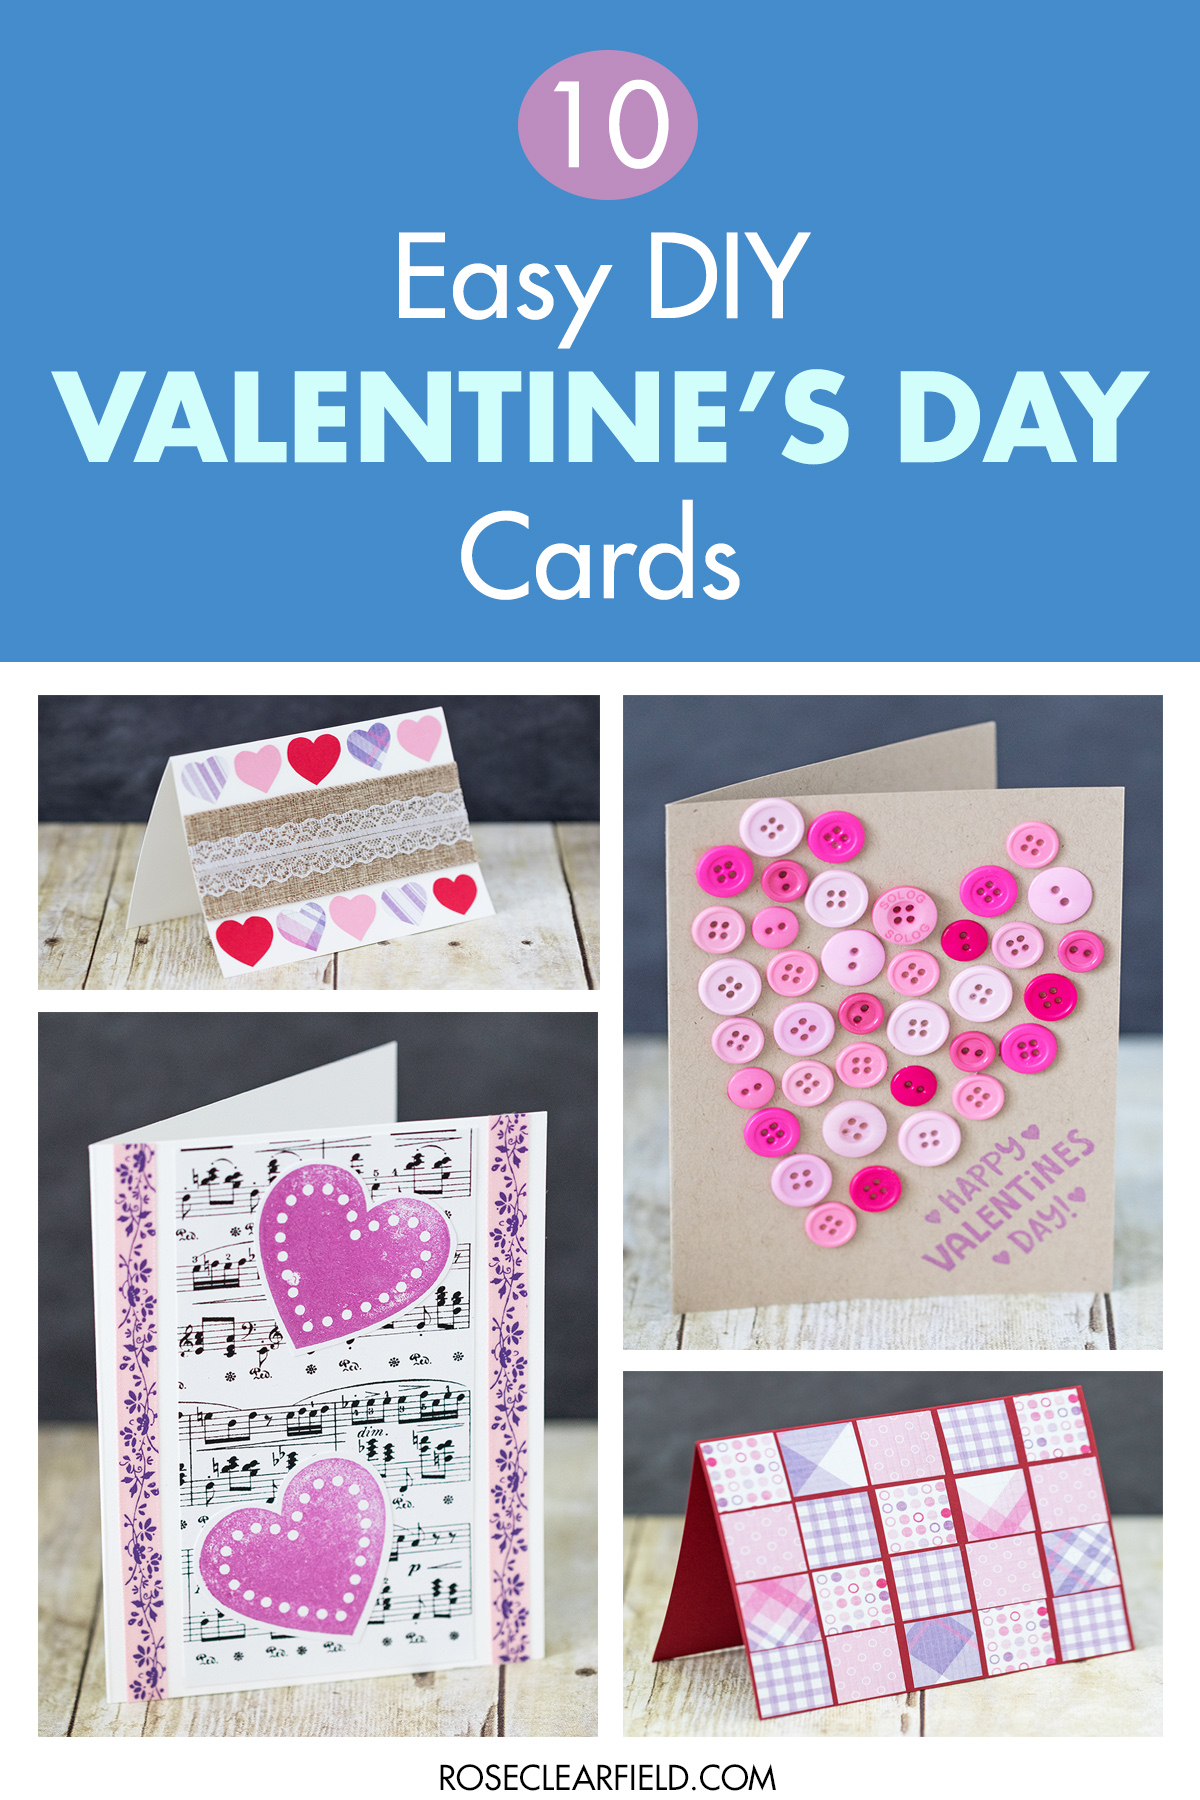 38-lovely-handmade-valentine-cards-for-your-loved-ones-godfather-style